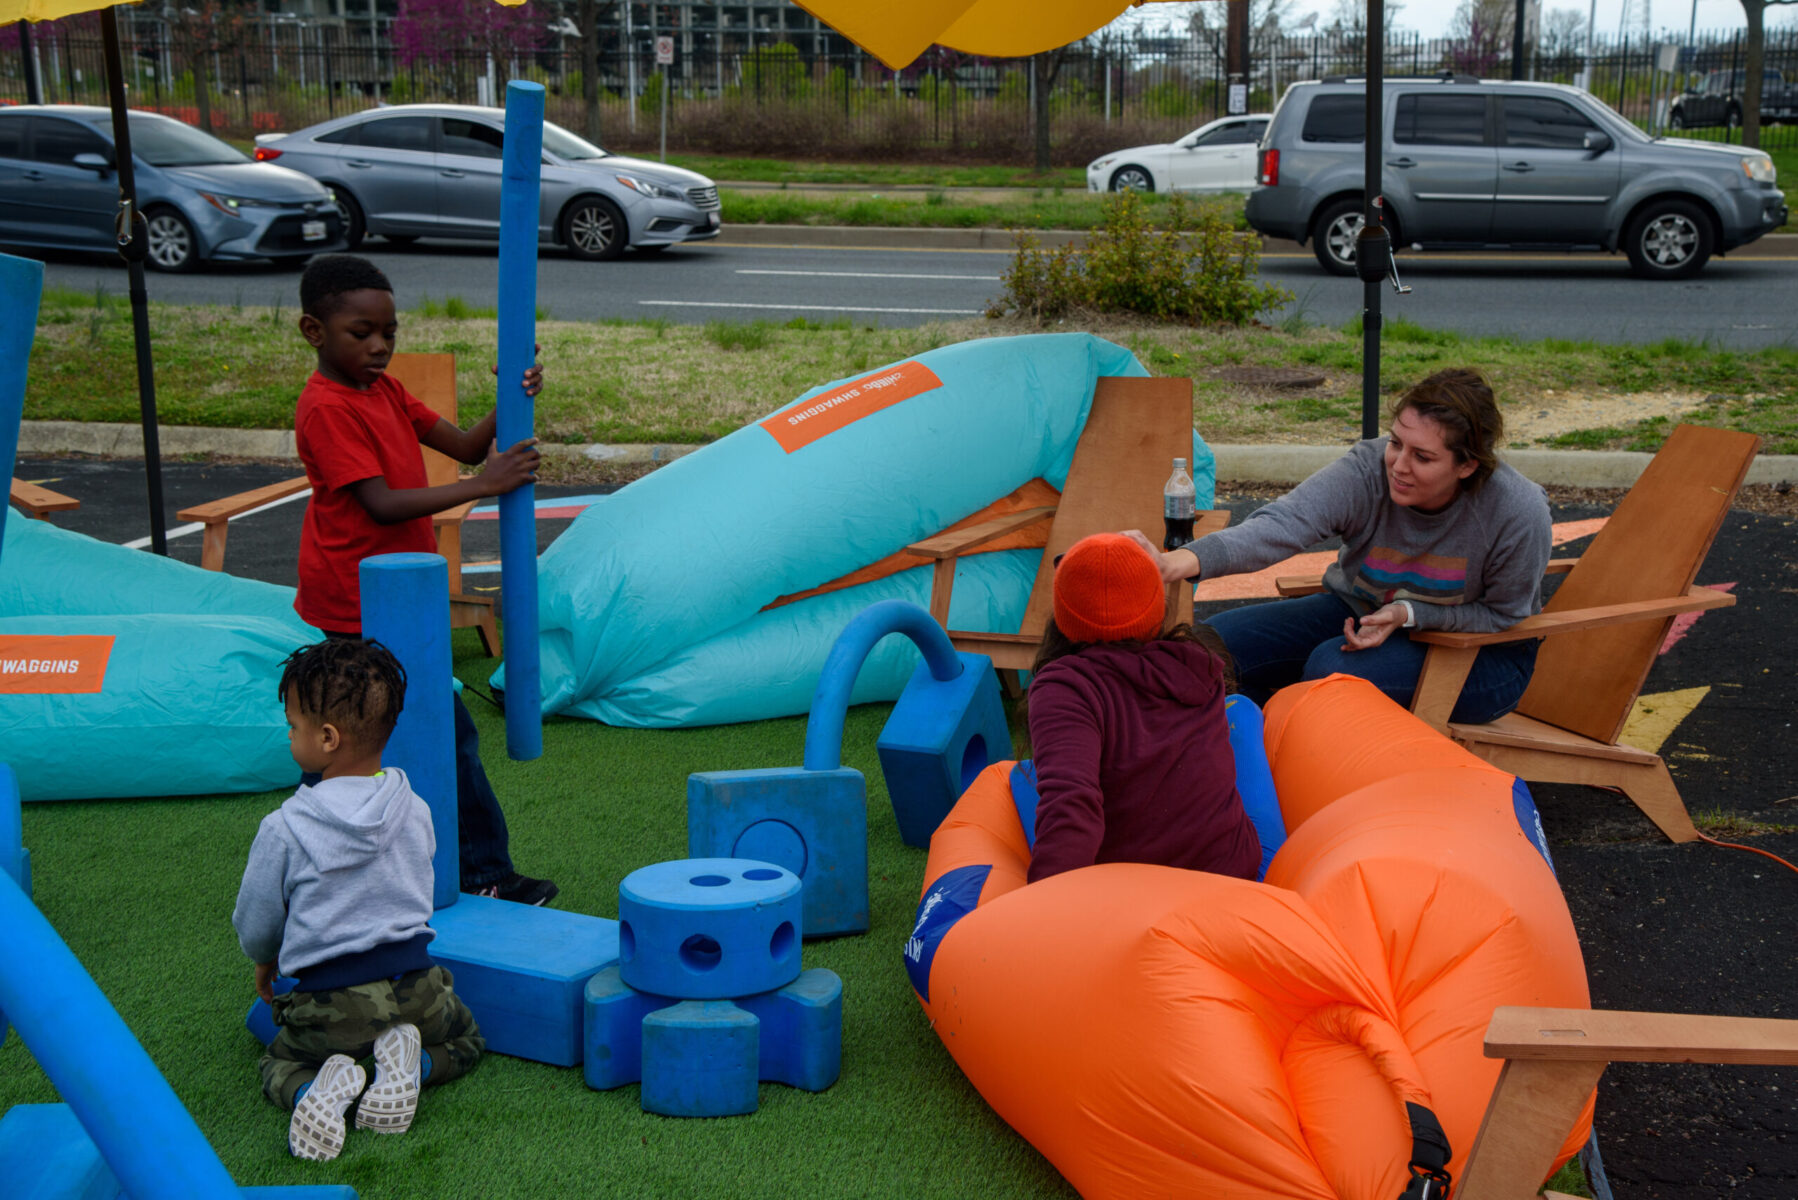 Placemaking giant foam blocks for kids to play with and blowup chairs to sit in in a parking lot.